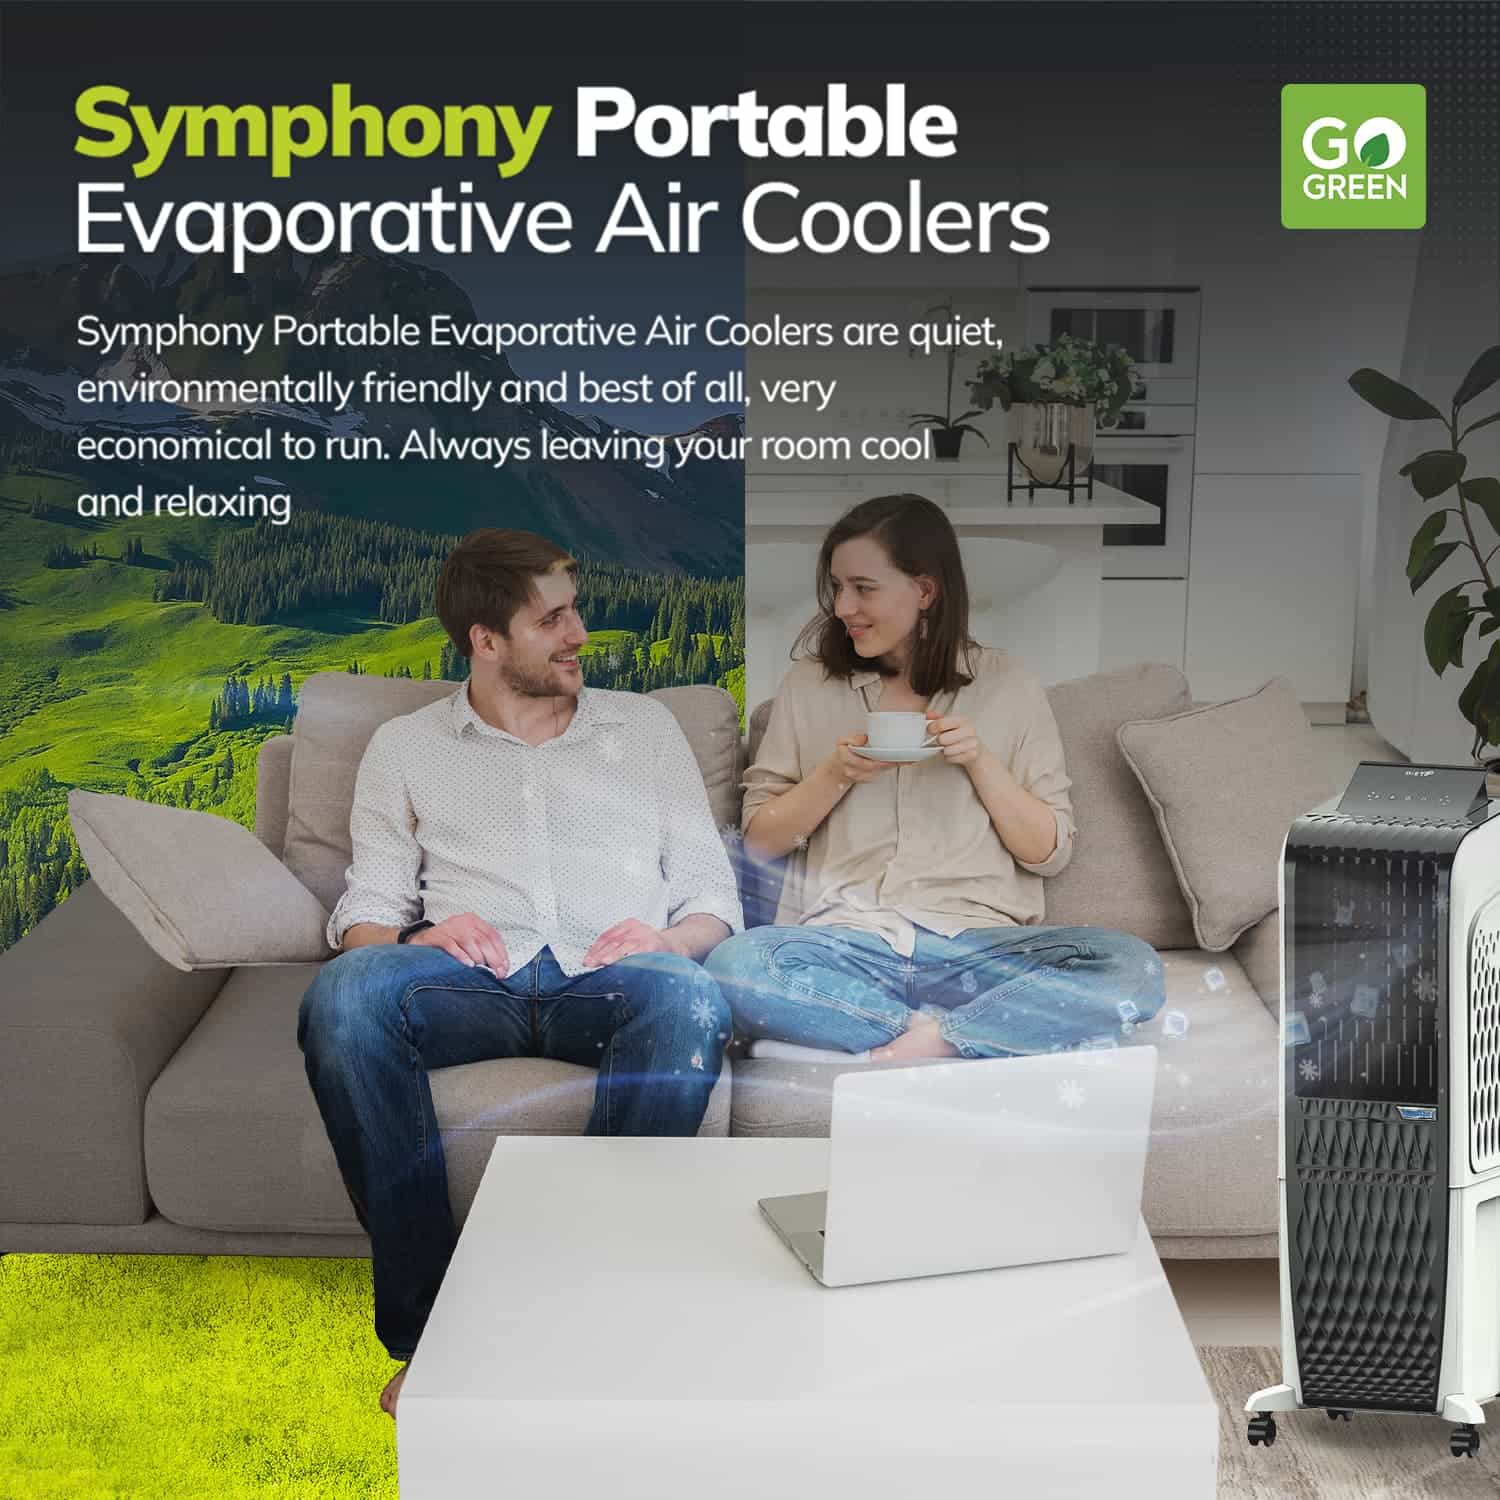 Symphony Portable Evaporative Air Coolers. Symphony Portable Evaporative Air Coolers are quiet, environmentally friendly and best of all, very economical to run. Always leaving your room cool and relaxing.